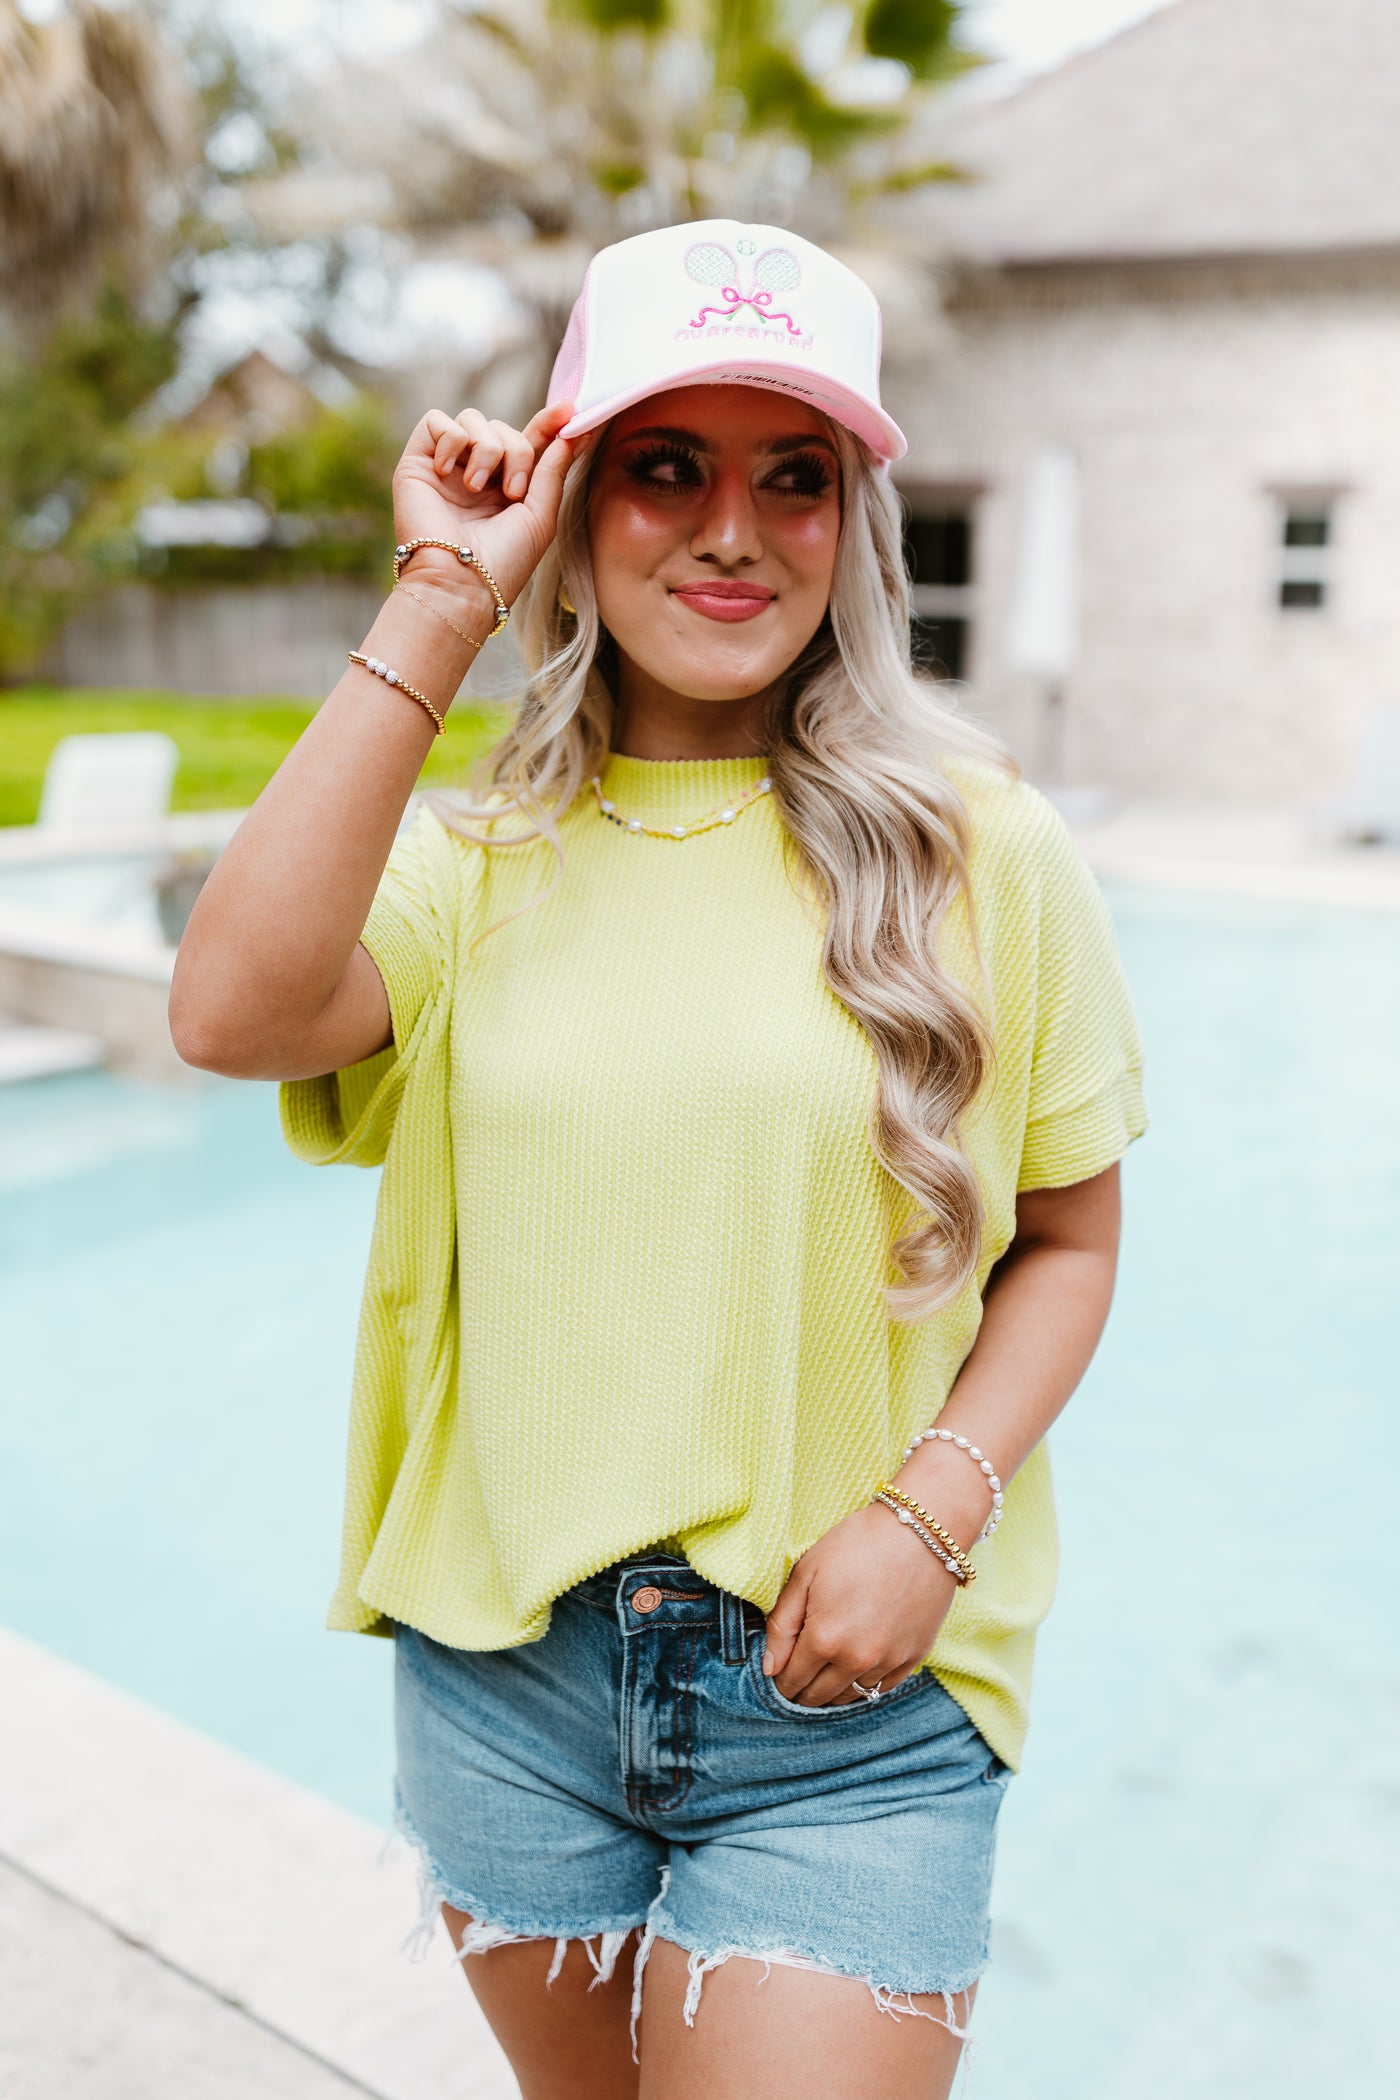 Lime Ribbed Short Sleeve Top